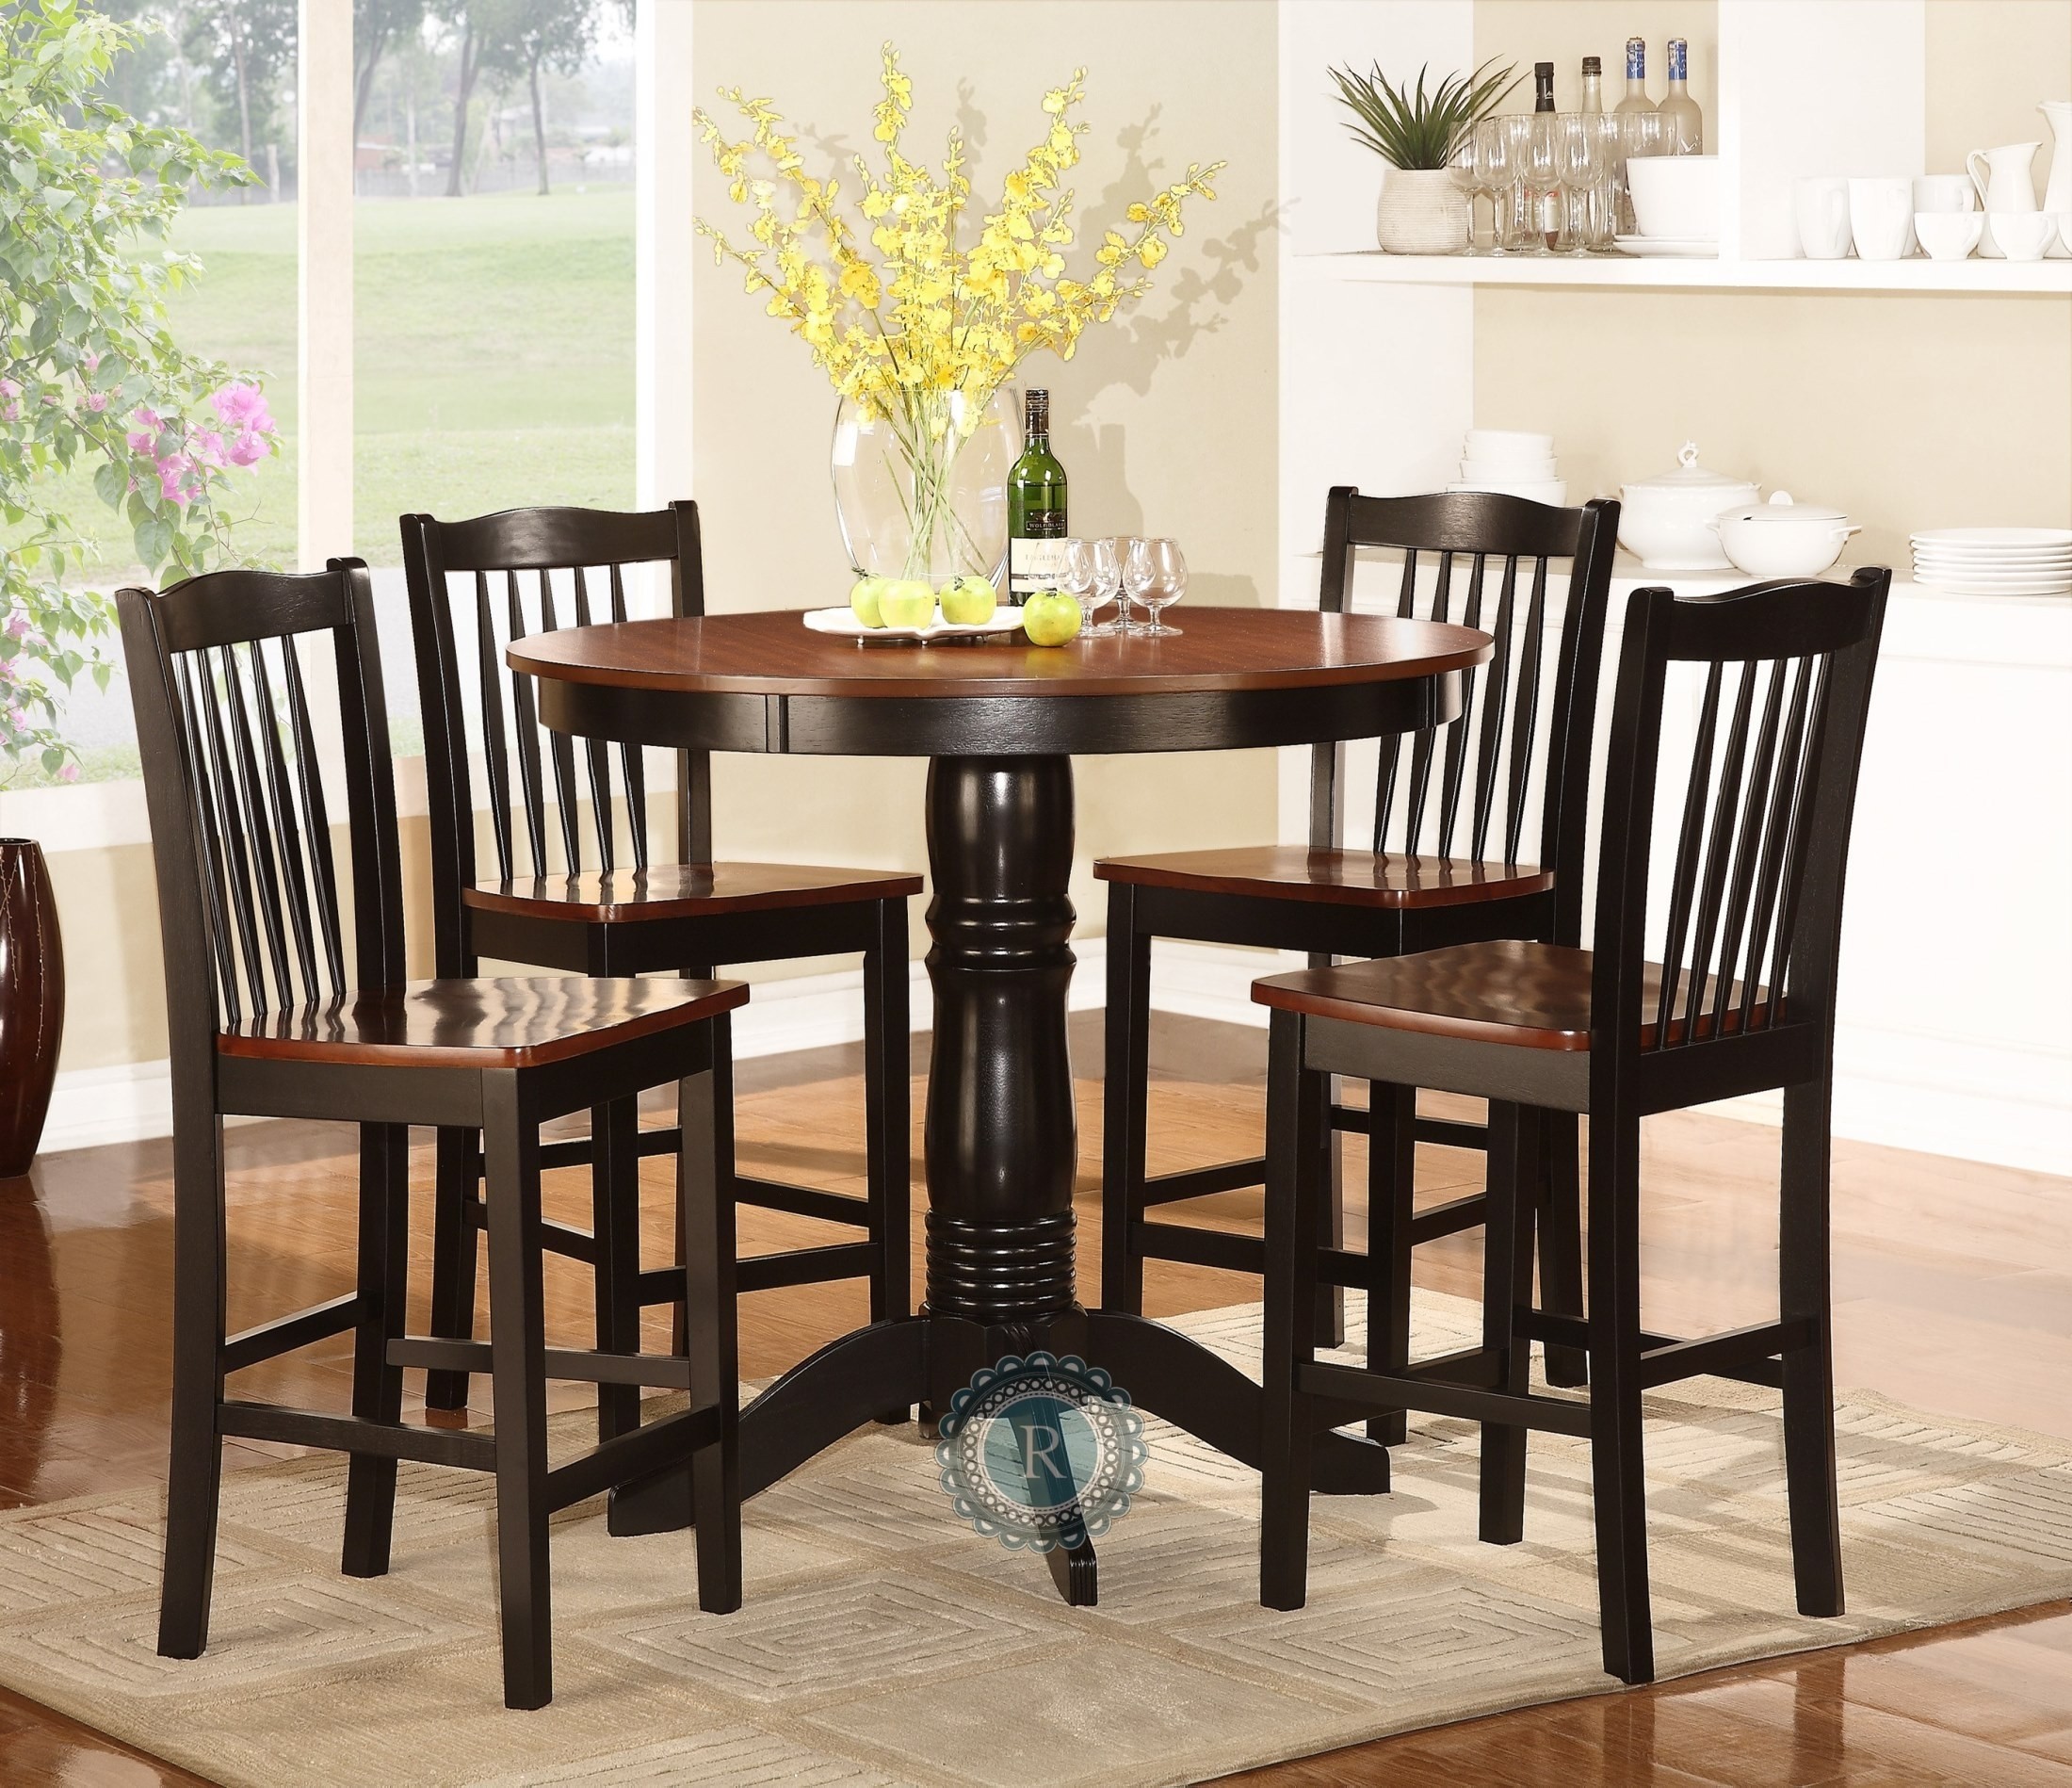 Homelegance 2458-36 5-Piece Round Counter Height Dining Set